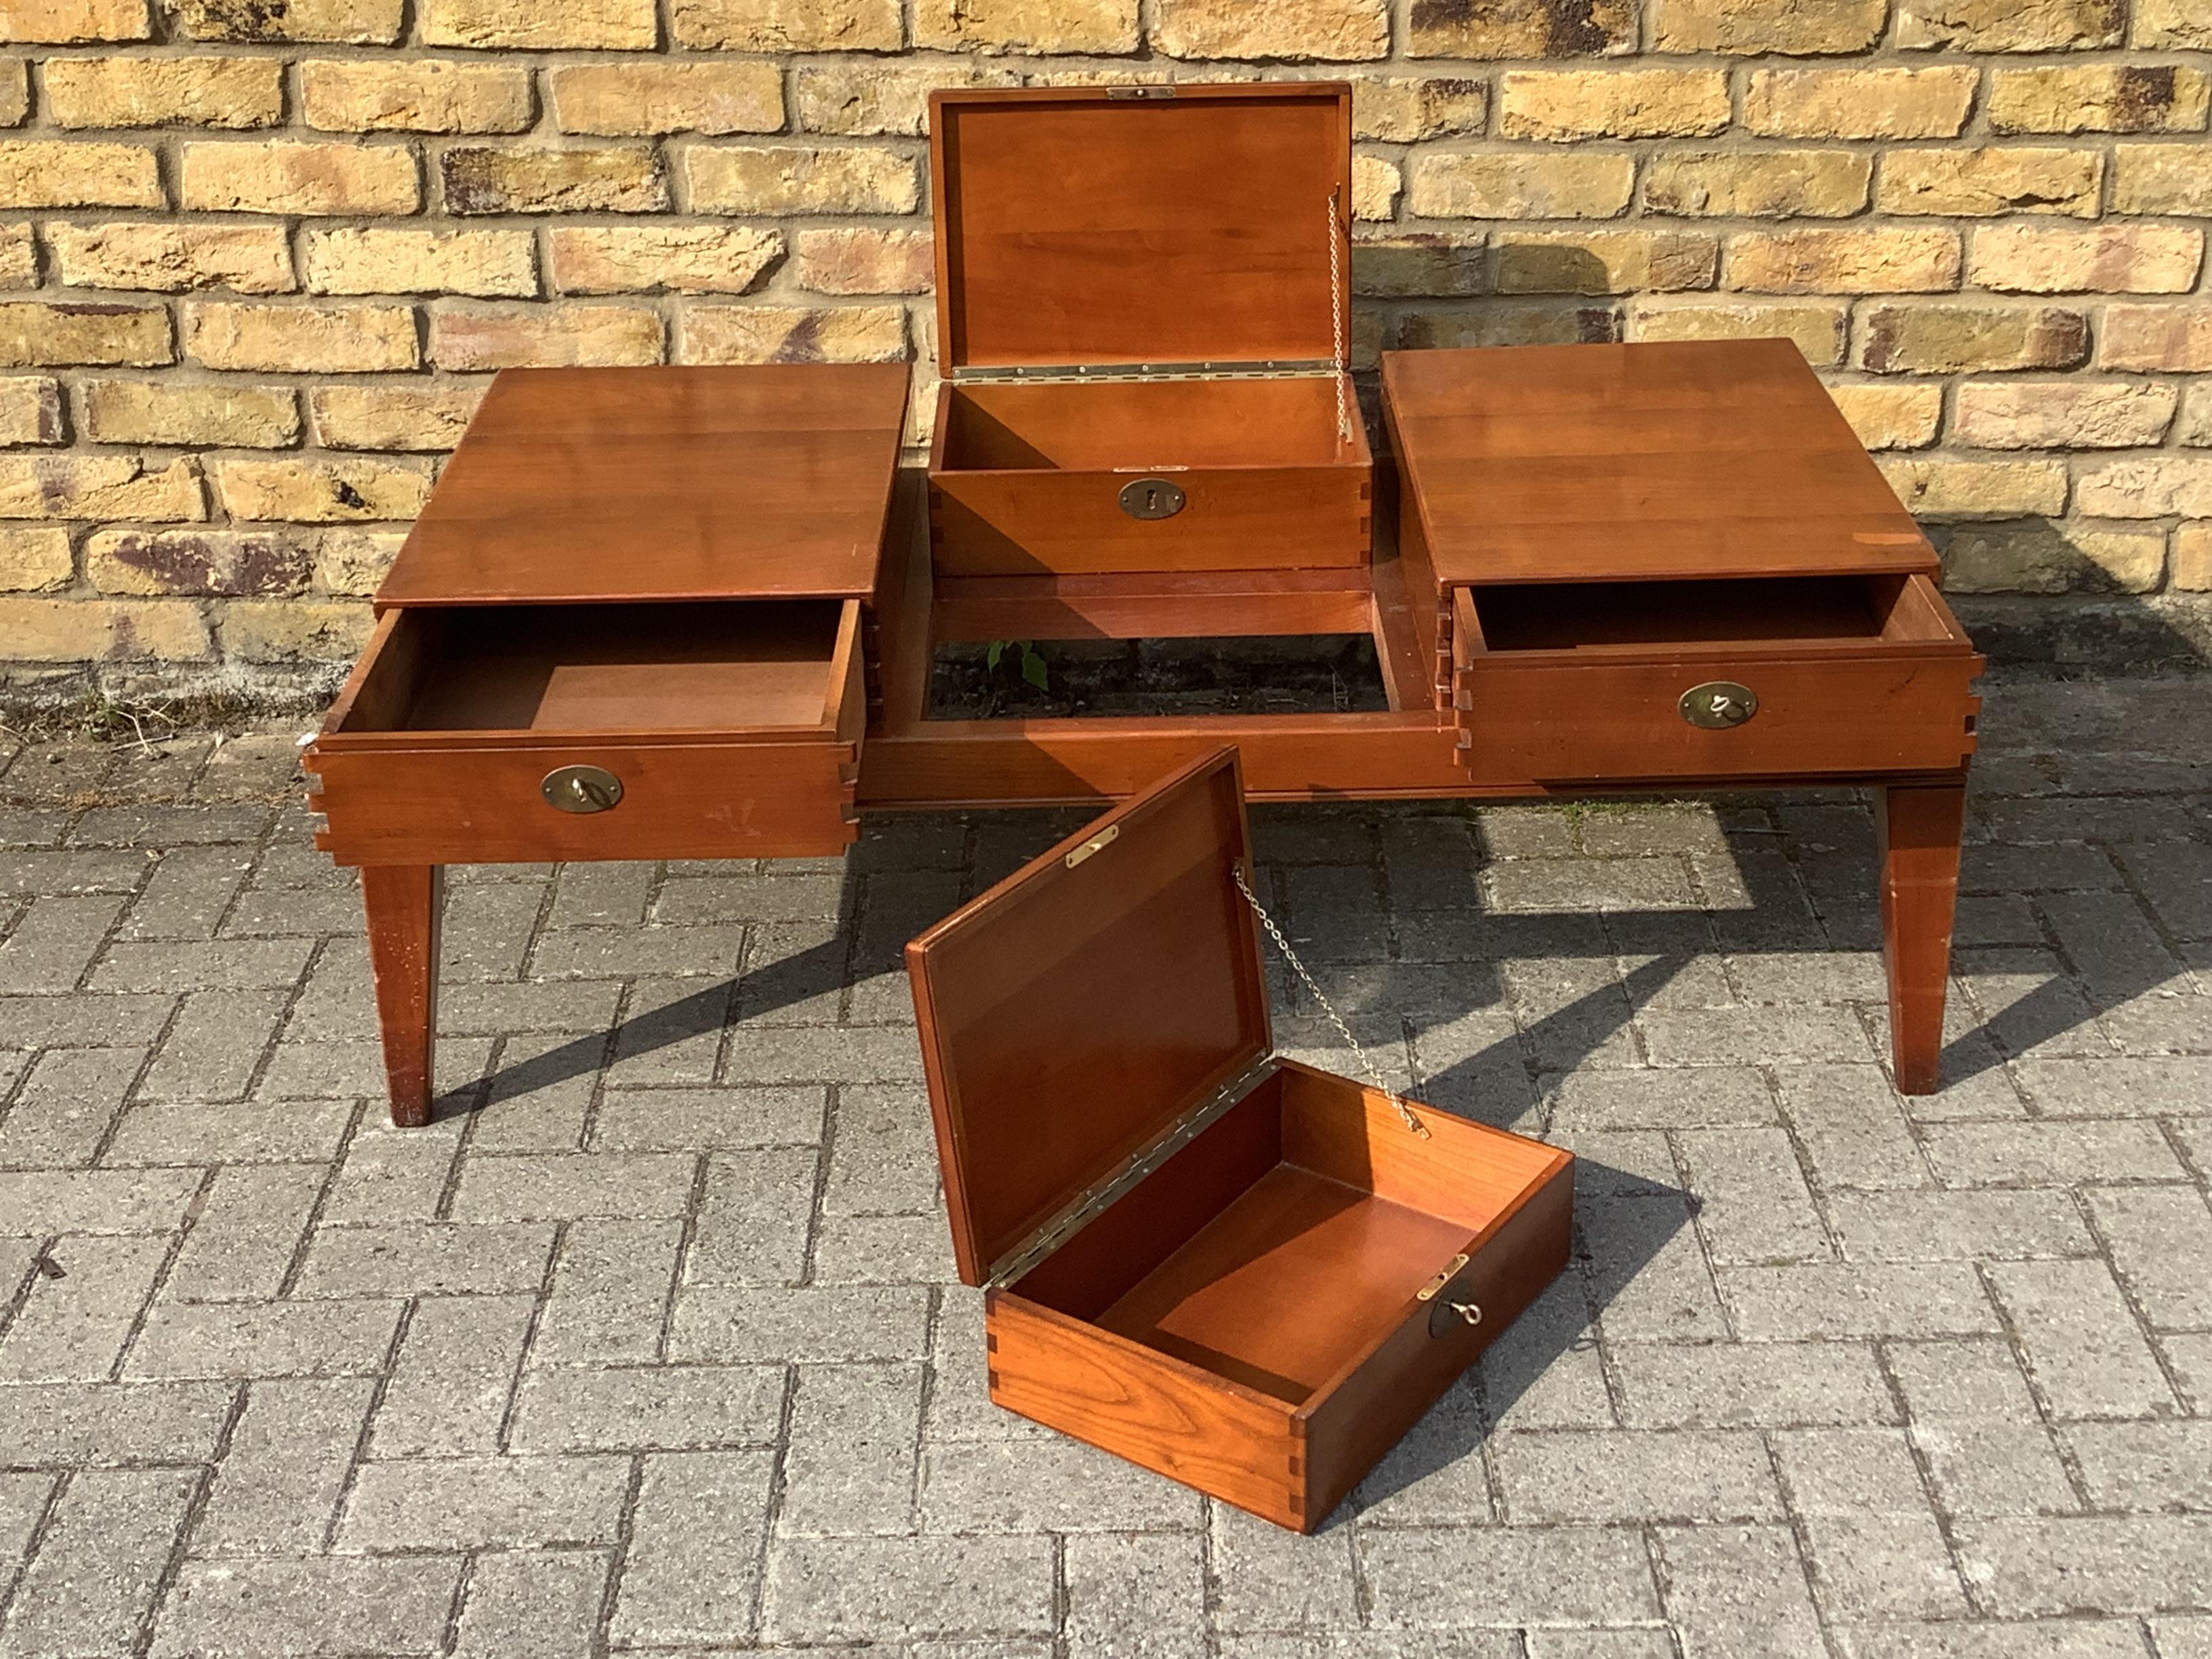 Limited edition coffee table with removable storage boxes unusual
and practical piece of furniture 
two of the boxes are lockable

1980-1990